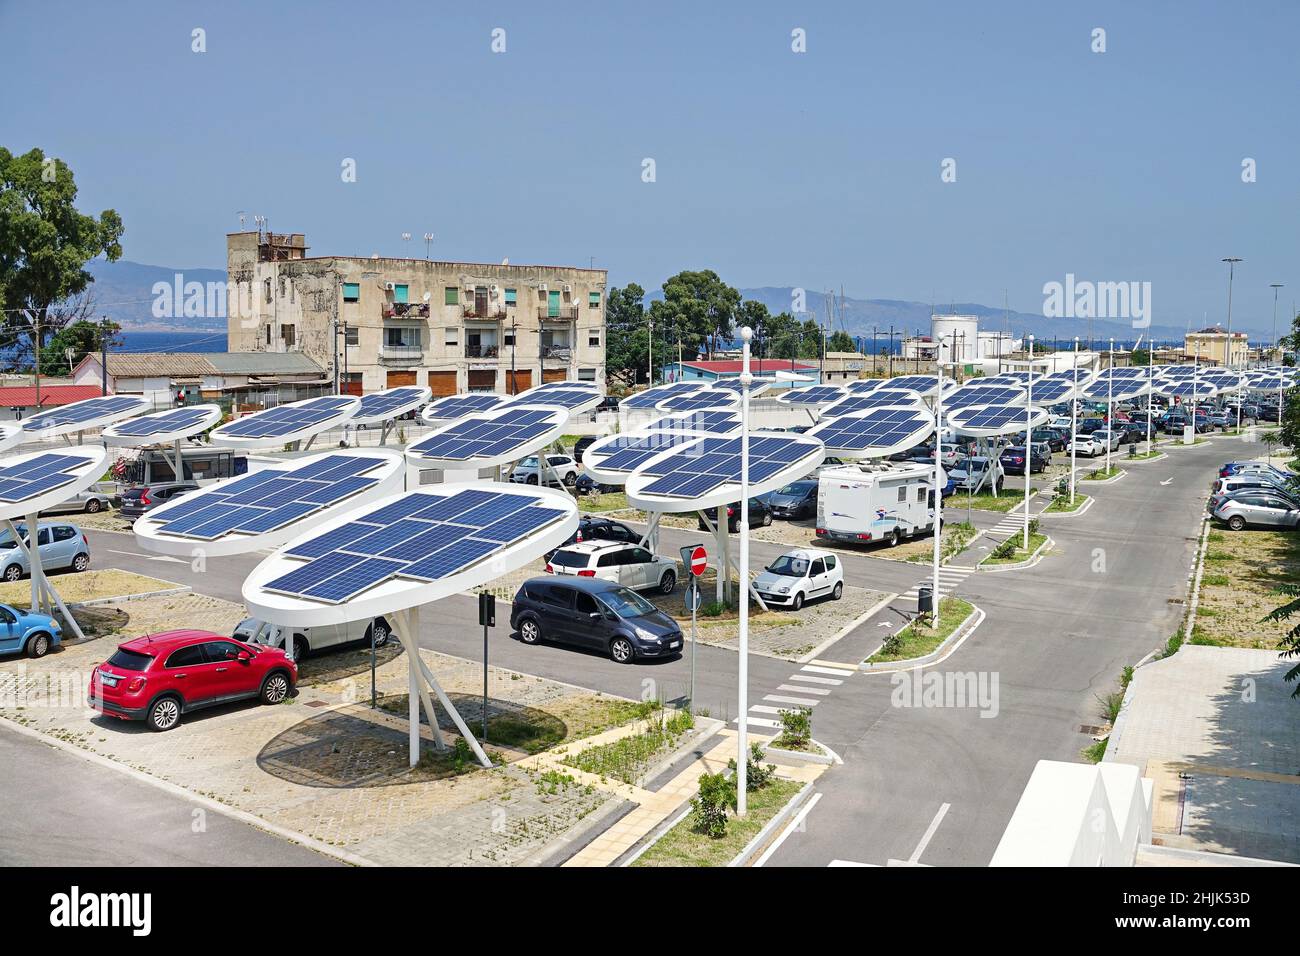 Solar panels in a car park. Companies are installing renewable energy sources to reduce their carbon footprint.  Reggio Calabria, Italy - July 2021 Stock Photo